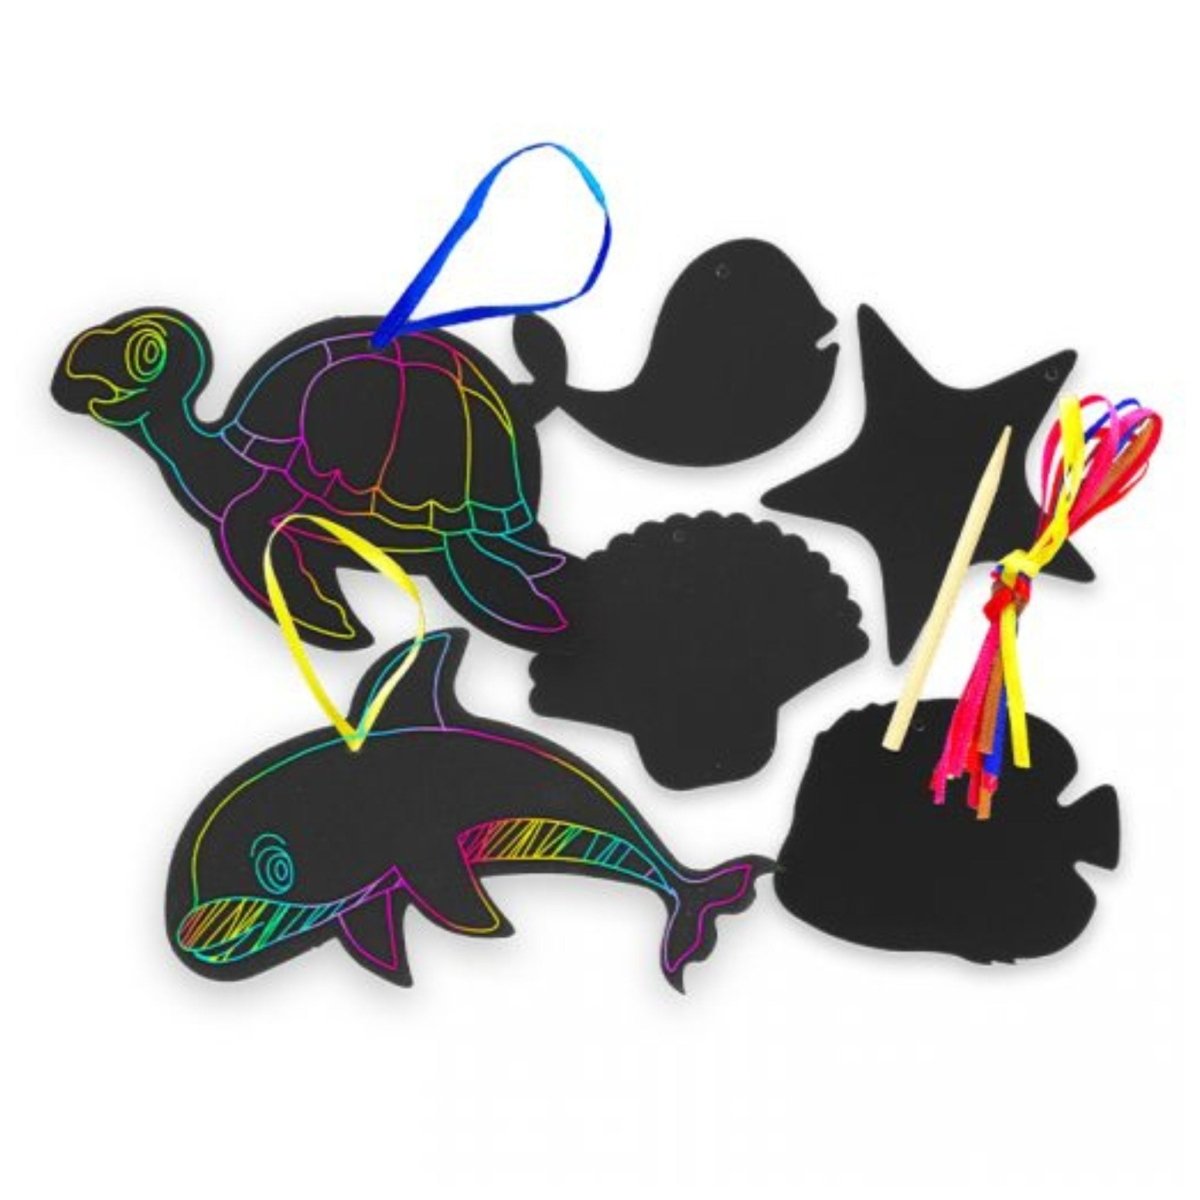 Sea Life Scratch Art Shapes 6 Pack - Kids Party Craft